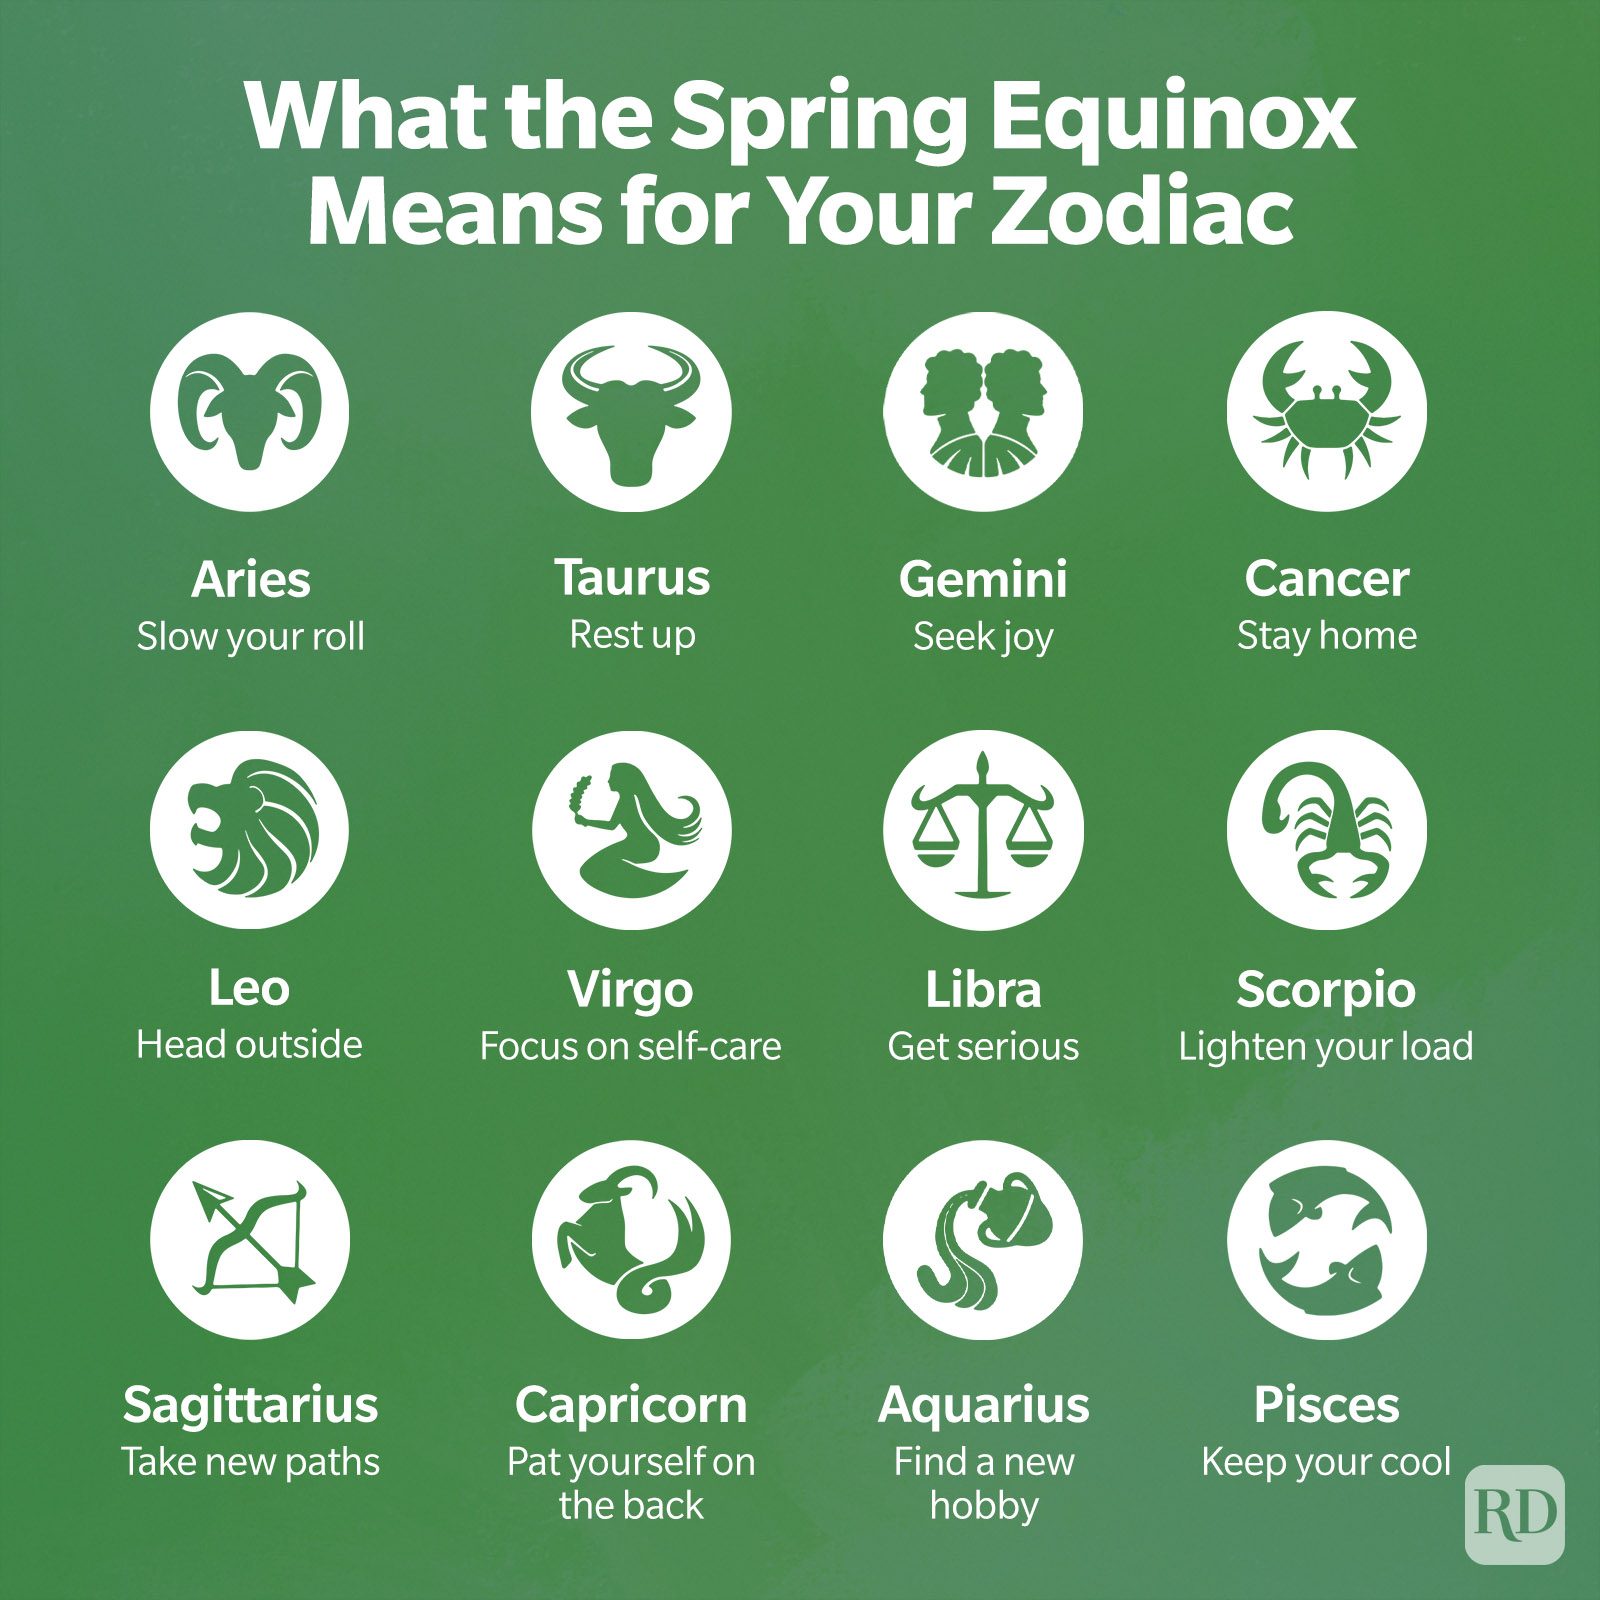 What Does an Ascendant or Rising Sign Mean in Your Birth Chart? - Exemplore